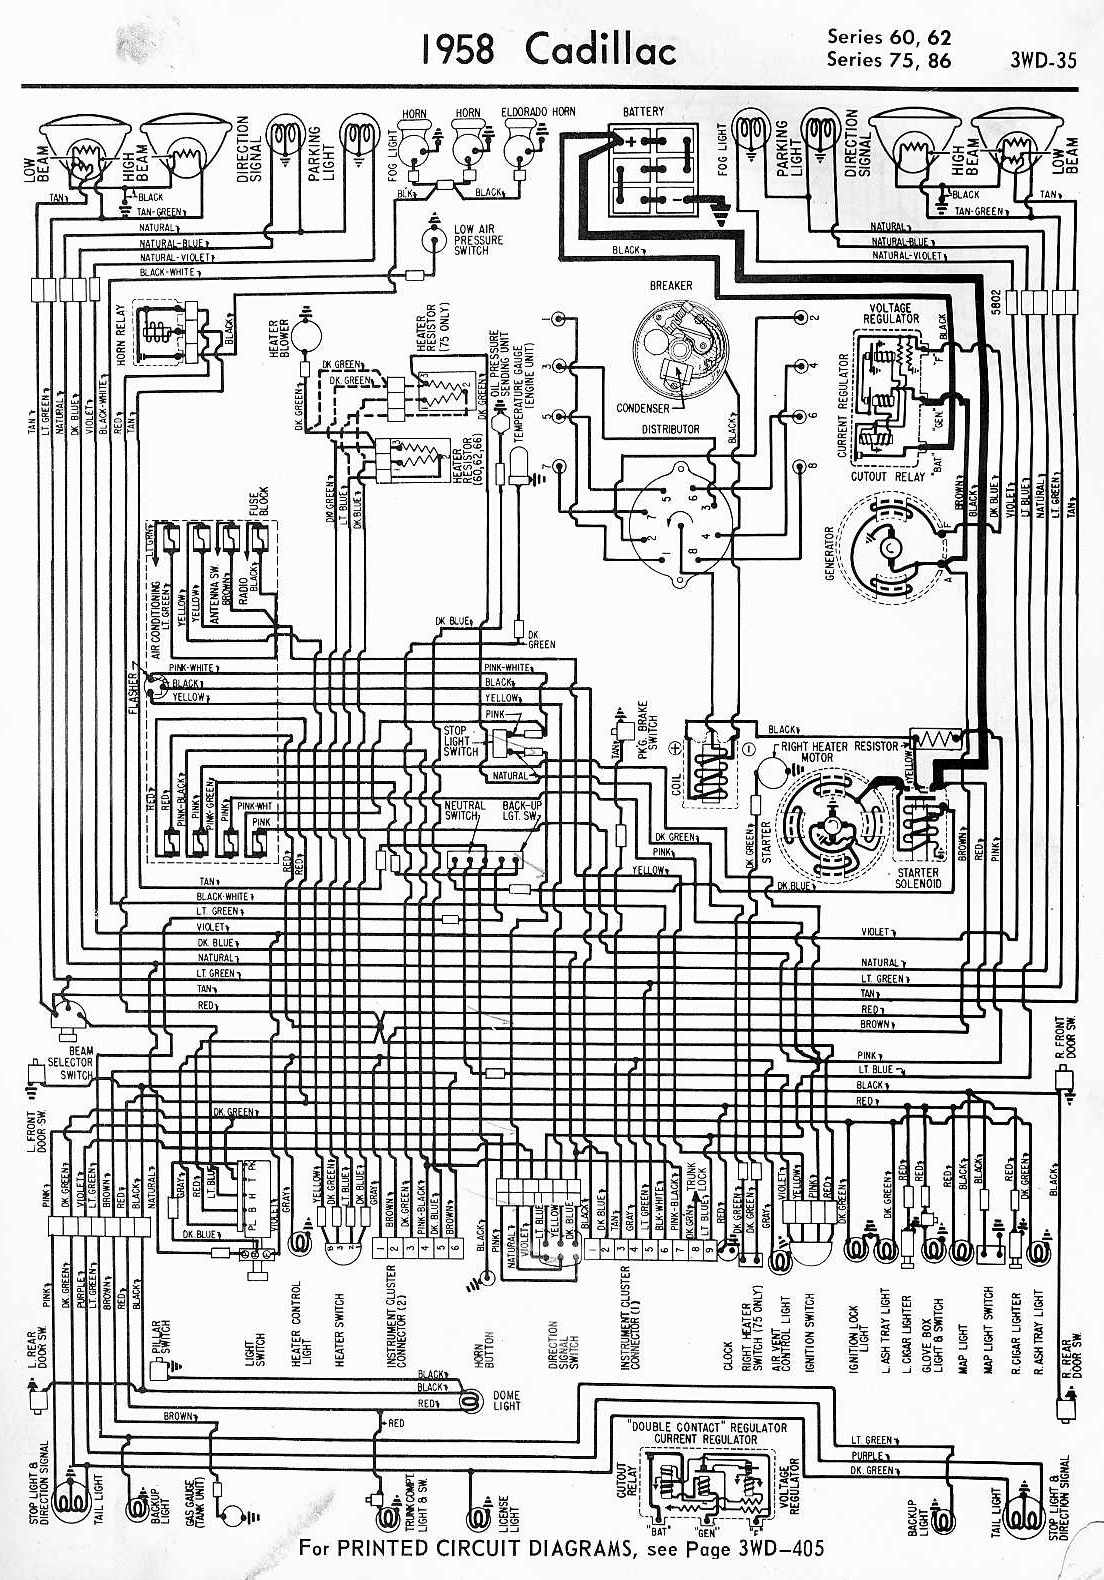 1963 Cadillac Fleetwood Wiring Diagrams from www.automotive-manuals.net